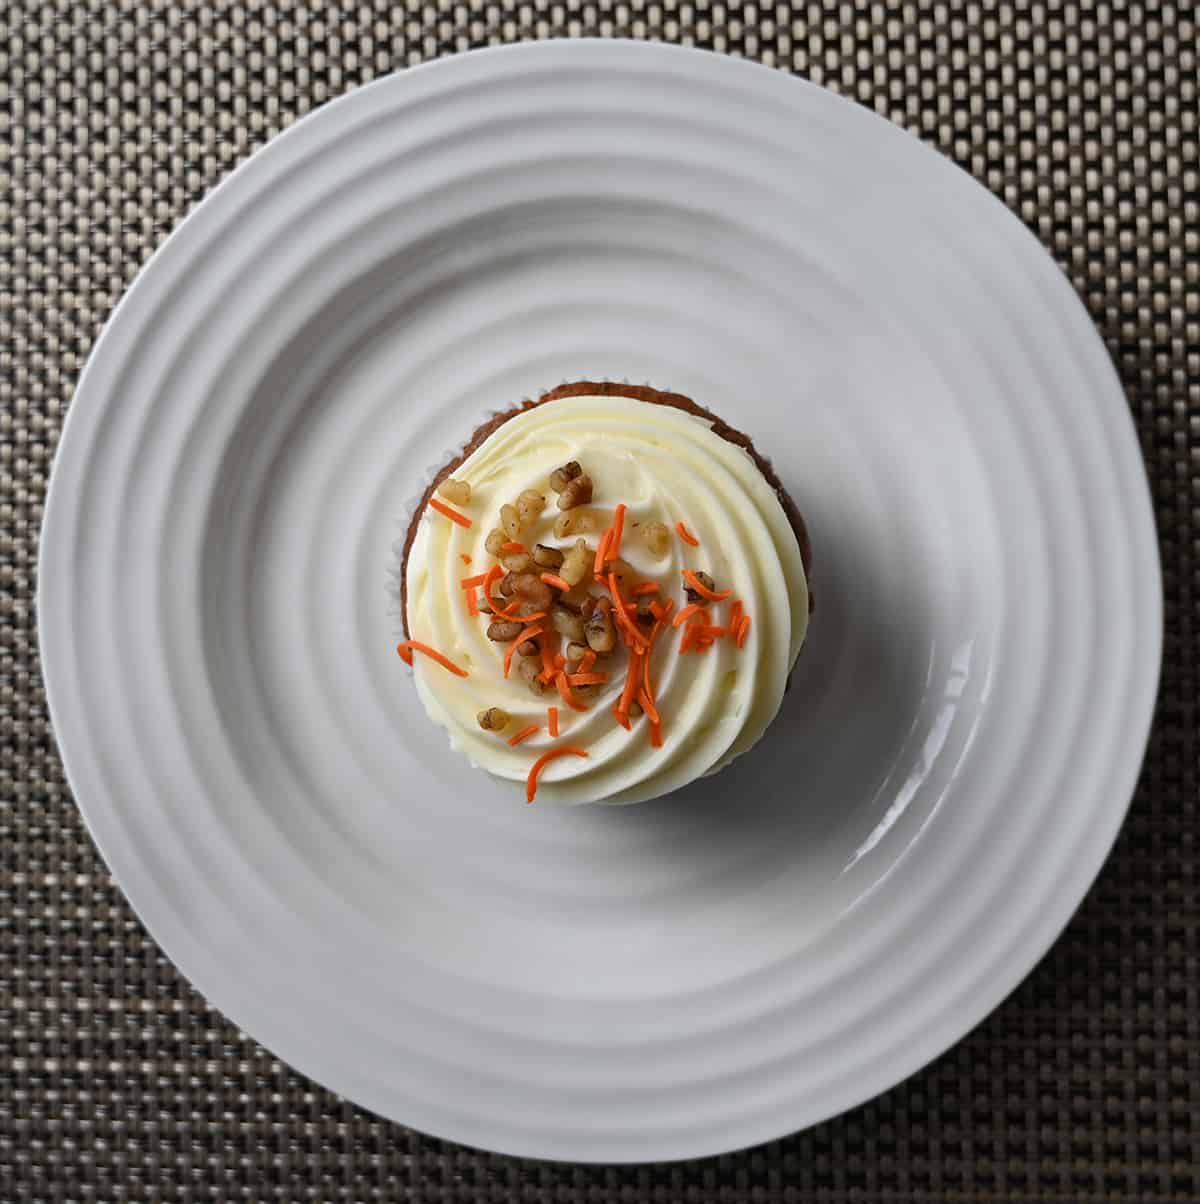 Top down image of one mini carrot cake served on a white plate, you can see orange shavings and walnuts on top of cream cheese icing.